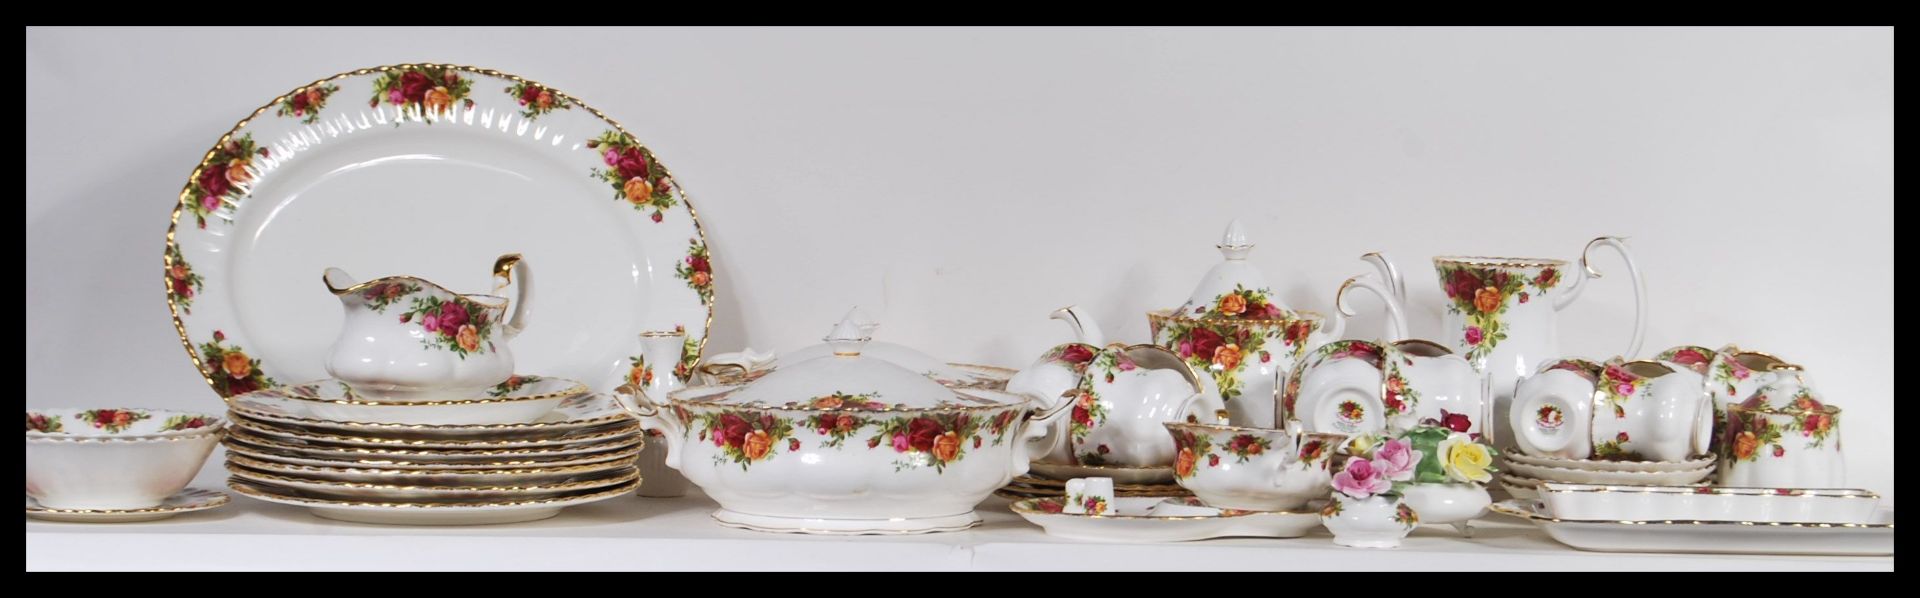 An extensive set of Royal Albert Old Country Roses pattern tea service including tea pot, cups and